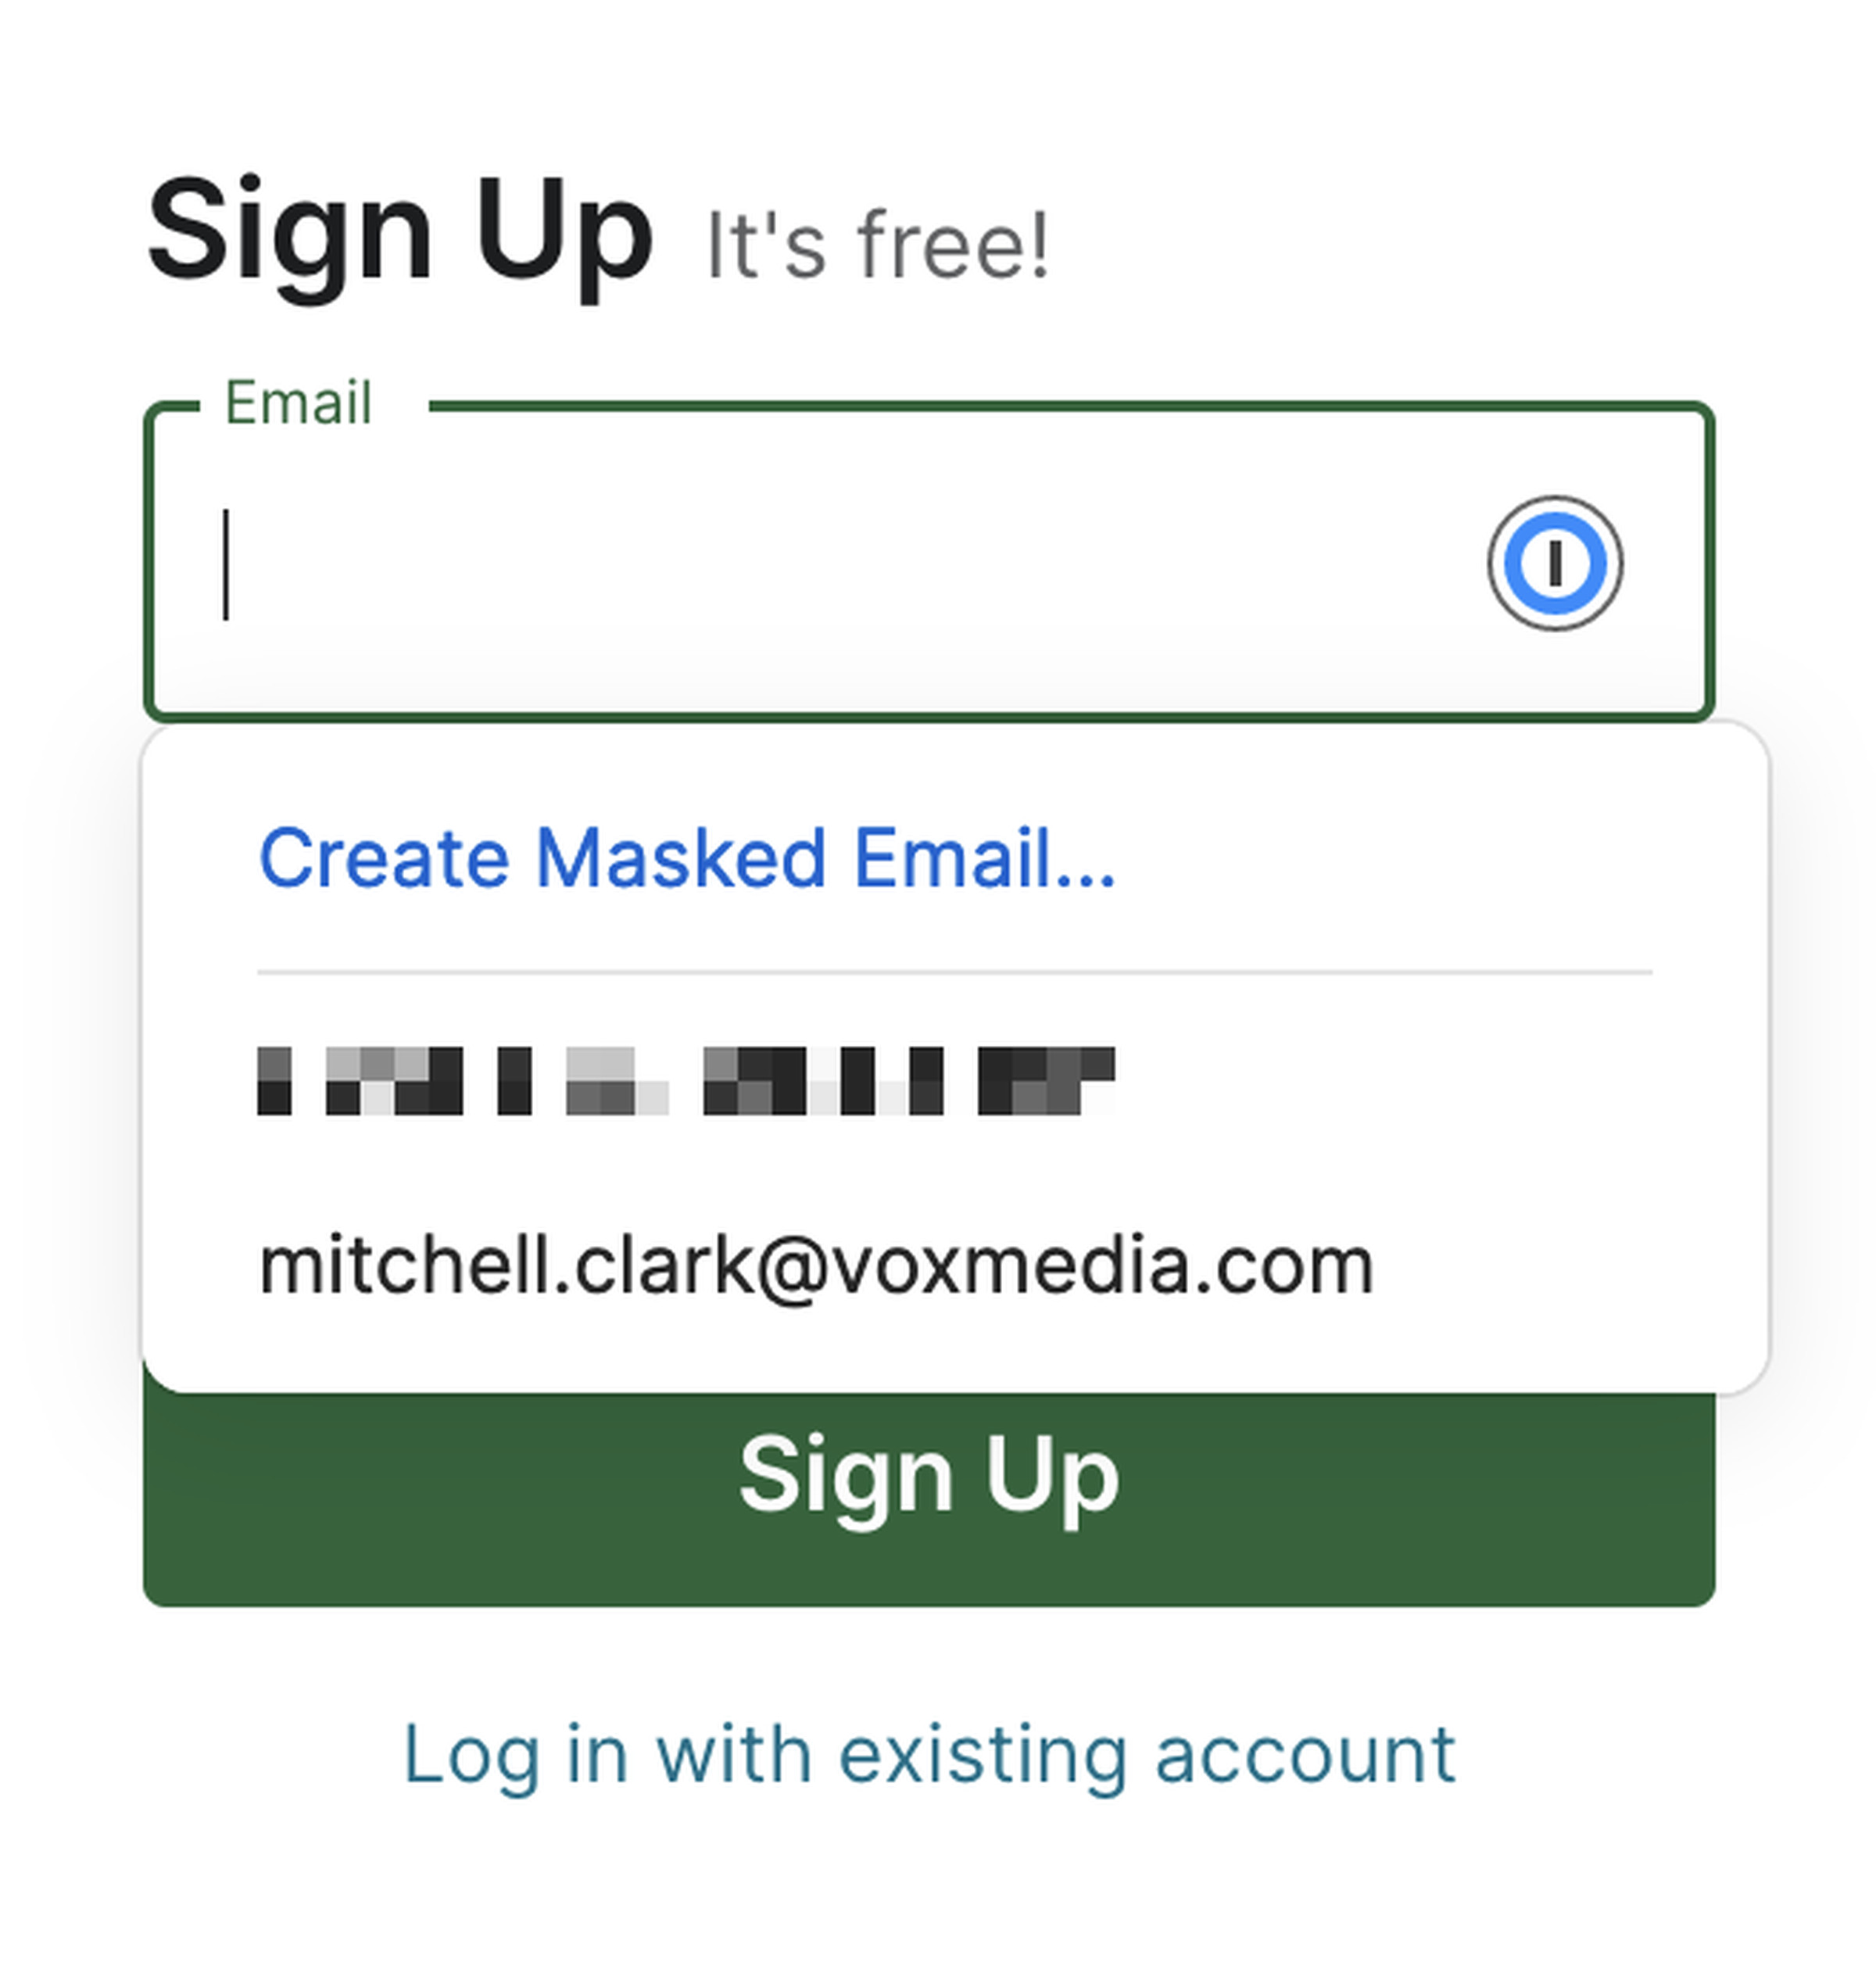 Clicking Create Masked Email will give you a popup showing the generated address.